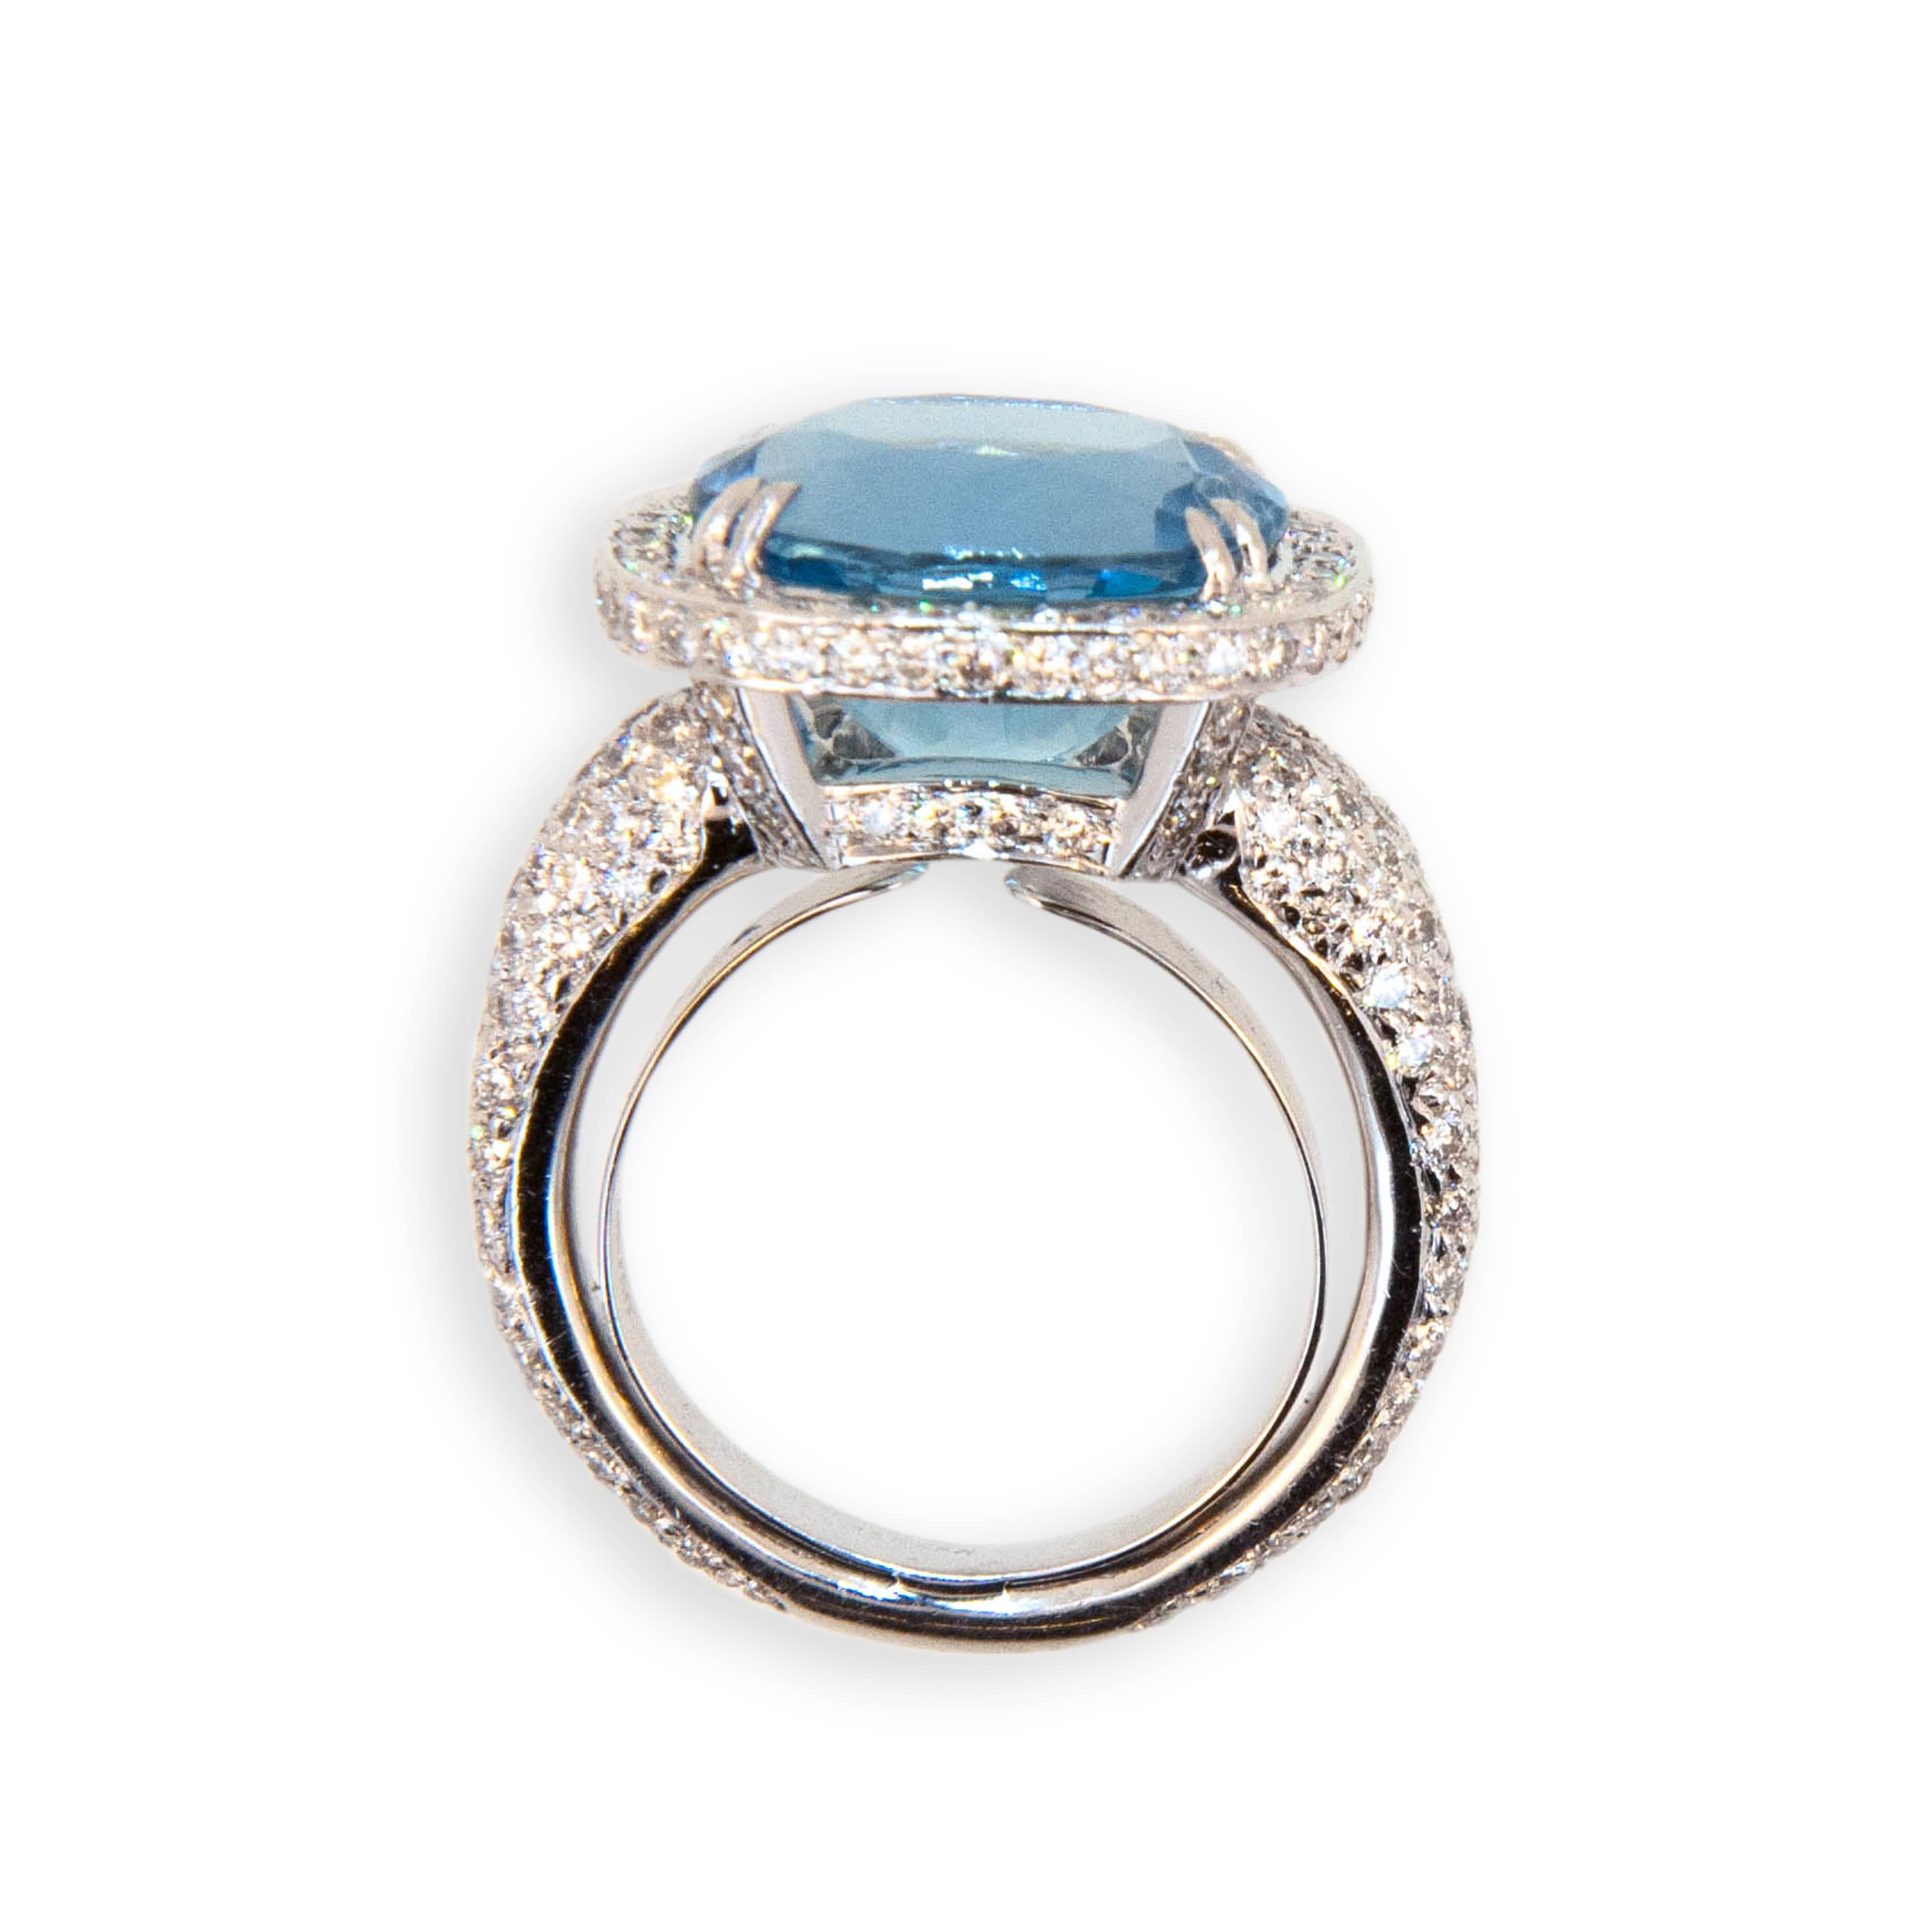 18 karat white gold ring set with Aquamarine 6.70 carats totaL weight. 
218 Round diamonds 1.93 carat total weight. Diamonds set on shank all the way around except on sizing bar at bottom. Diamonds also under bezel beneath aquamarine. Ring is a size